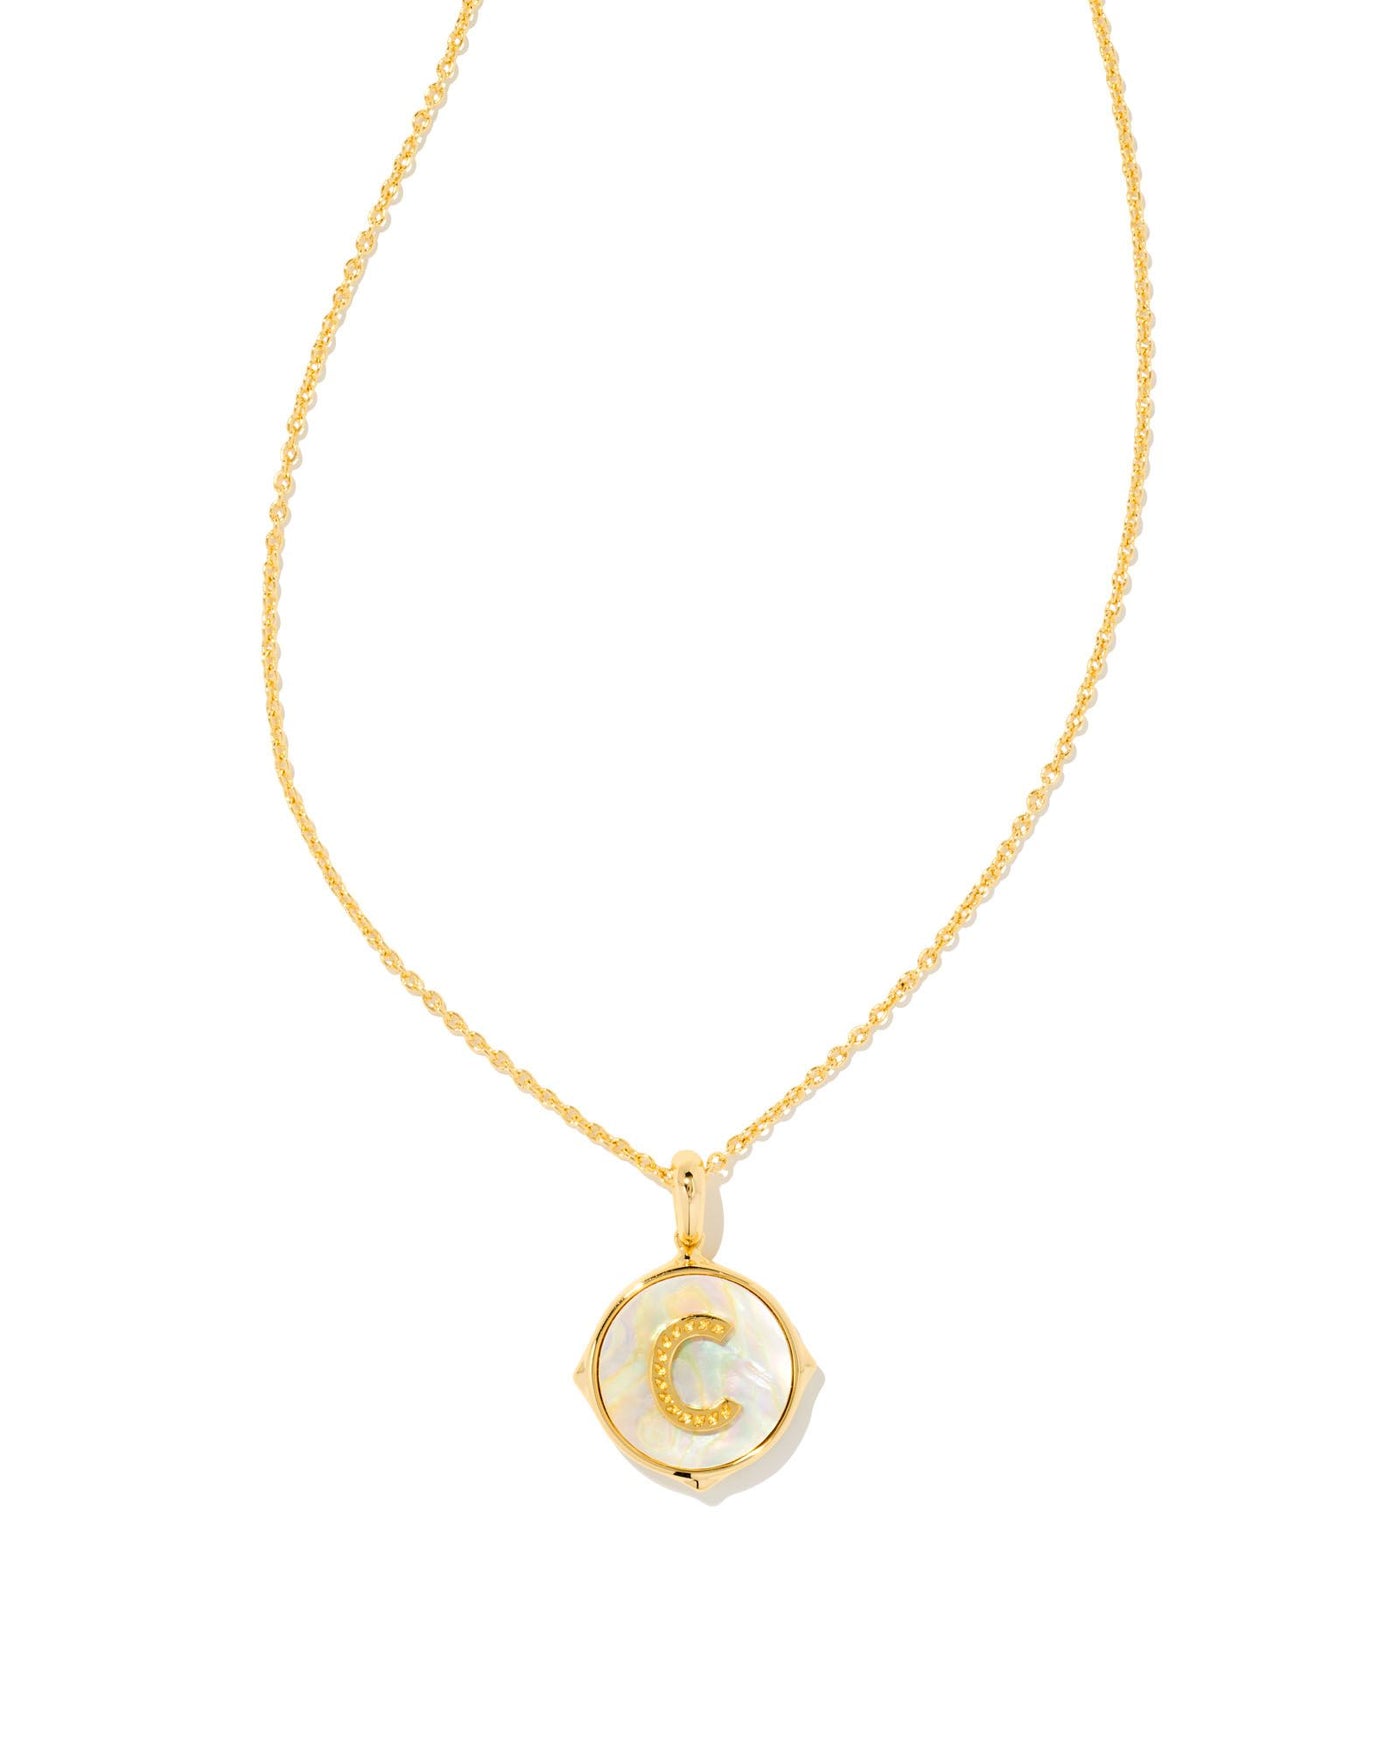 Letter C Disc Pendant Necklace Gold on white background, front view.